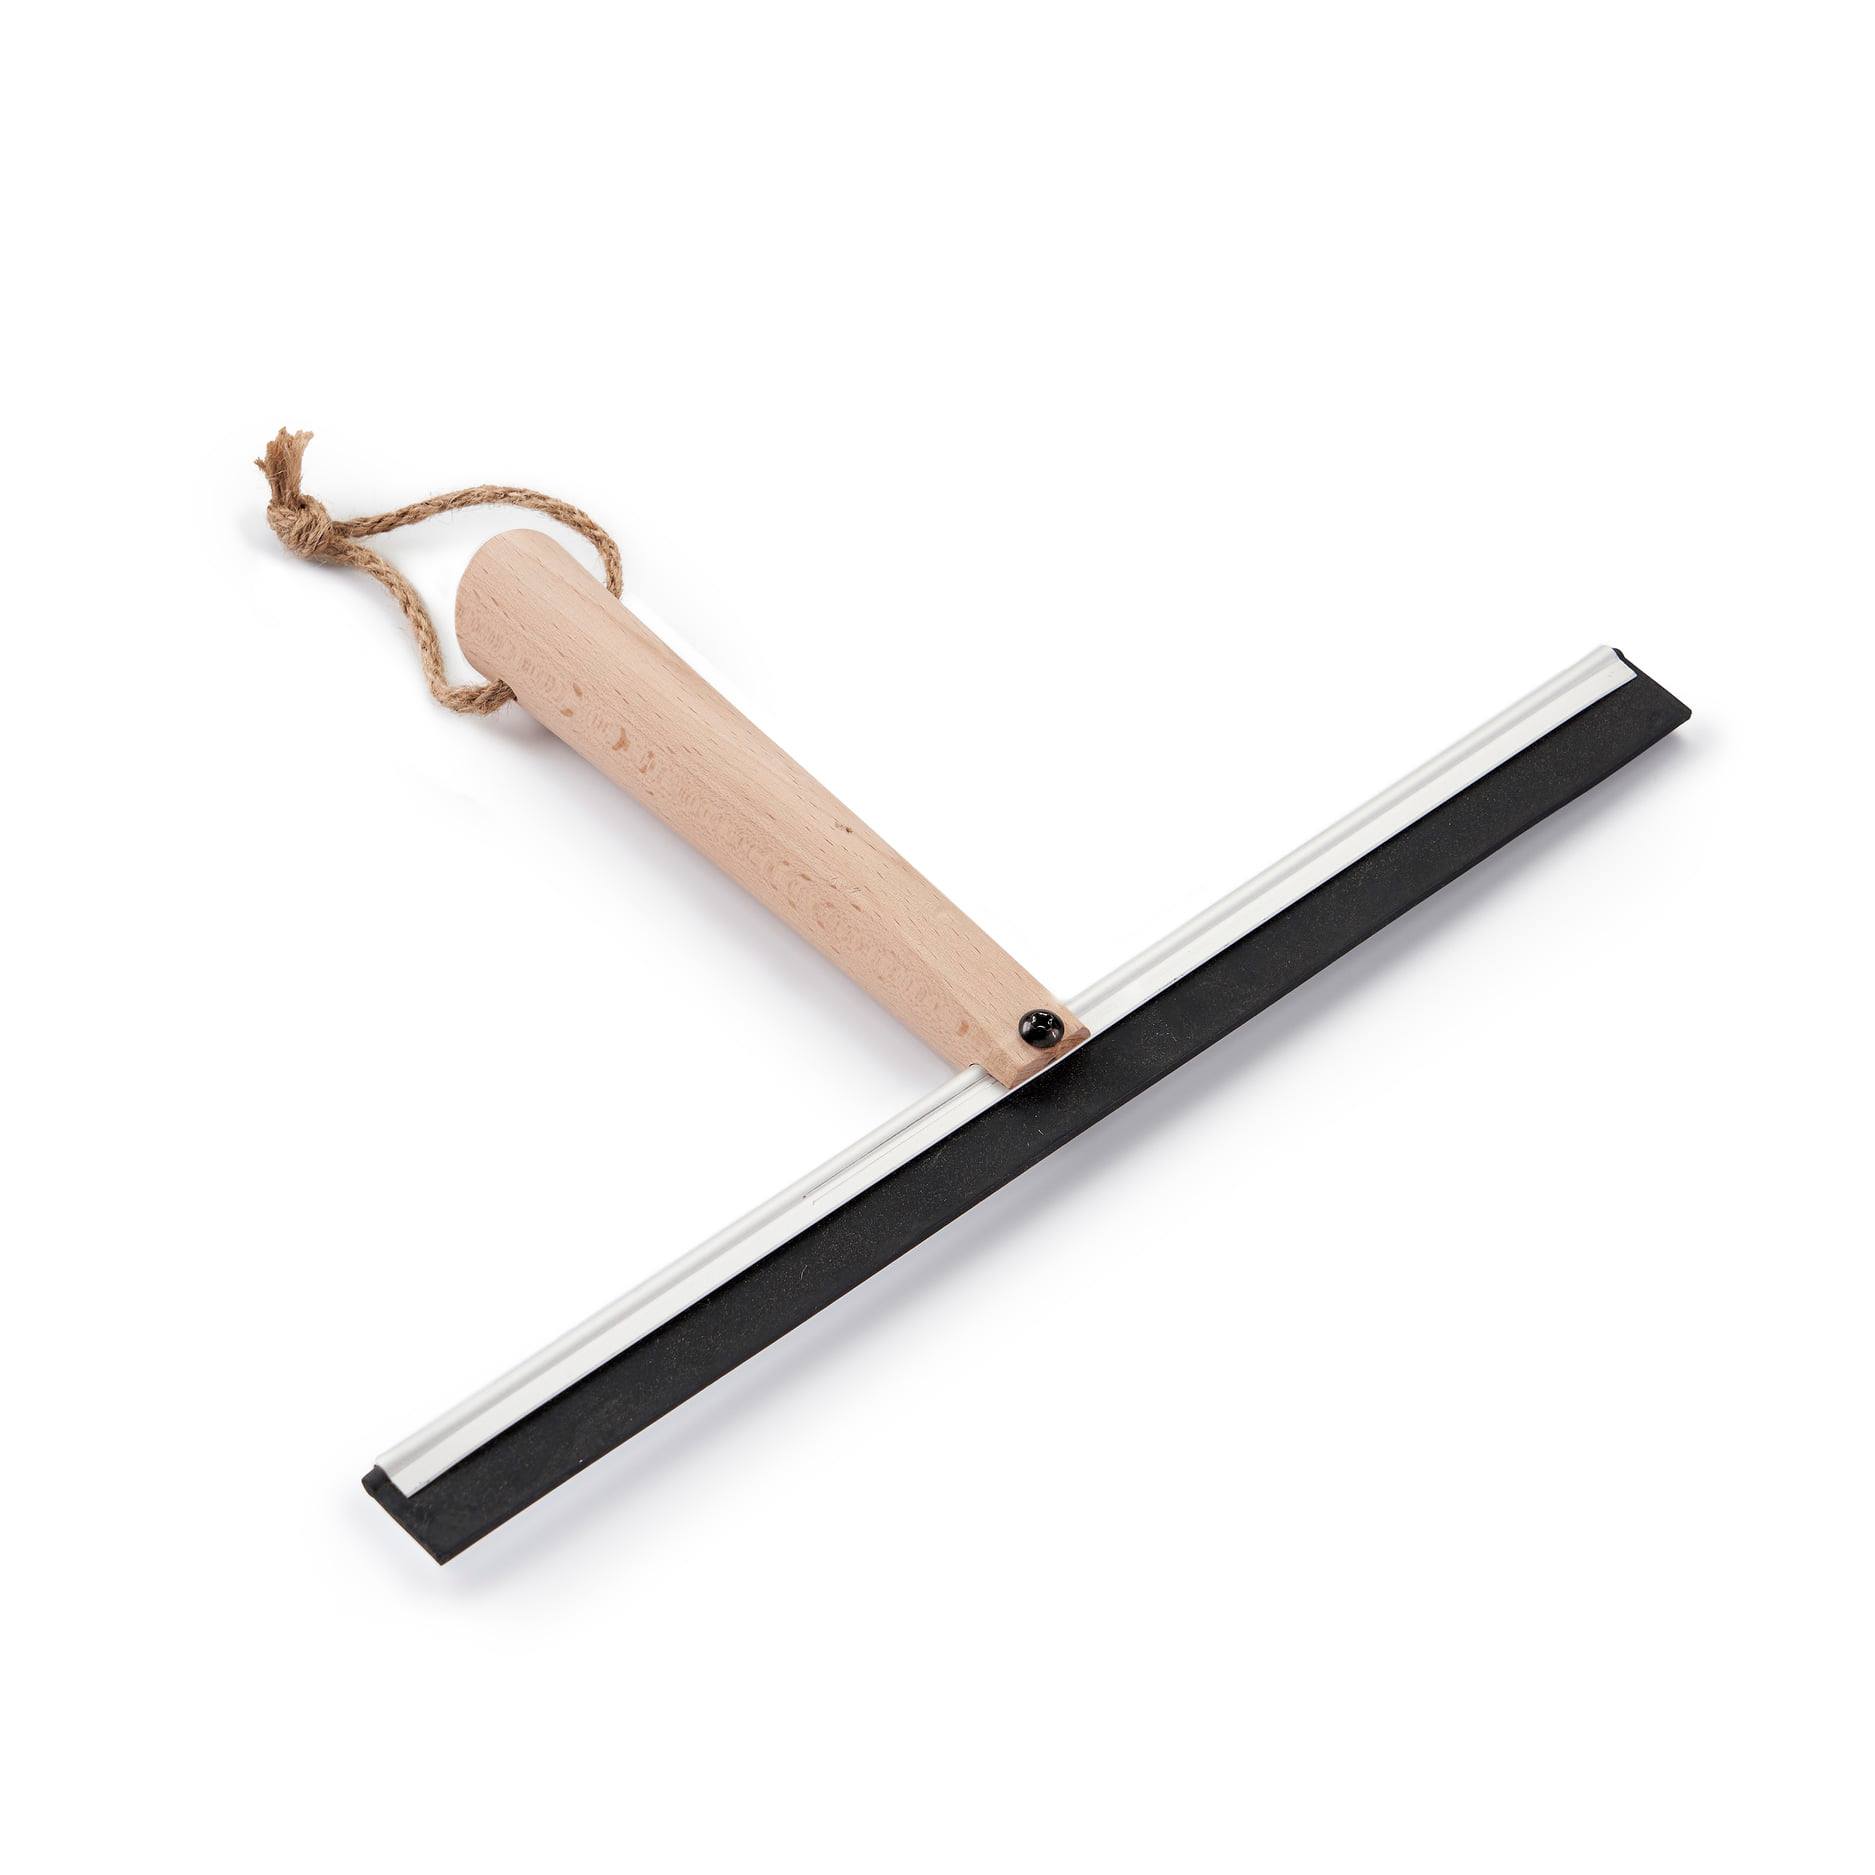 Wooden Squeegee, by Eco Living  Wooden Squeegee £6.75 Eco-friendly, Zero Waste The Contented Company